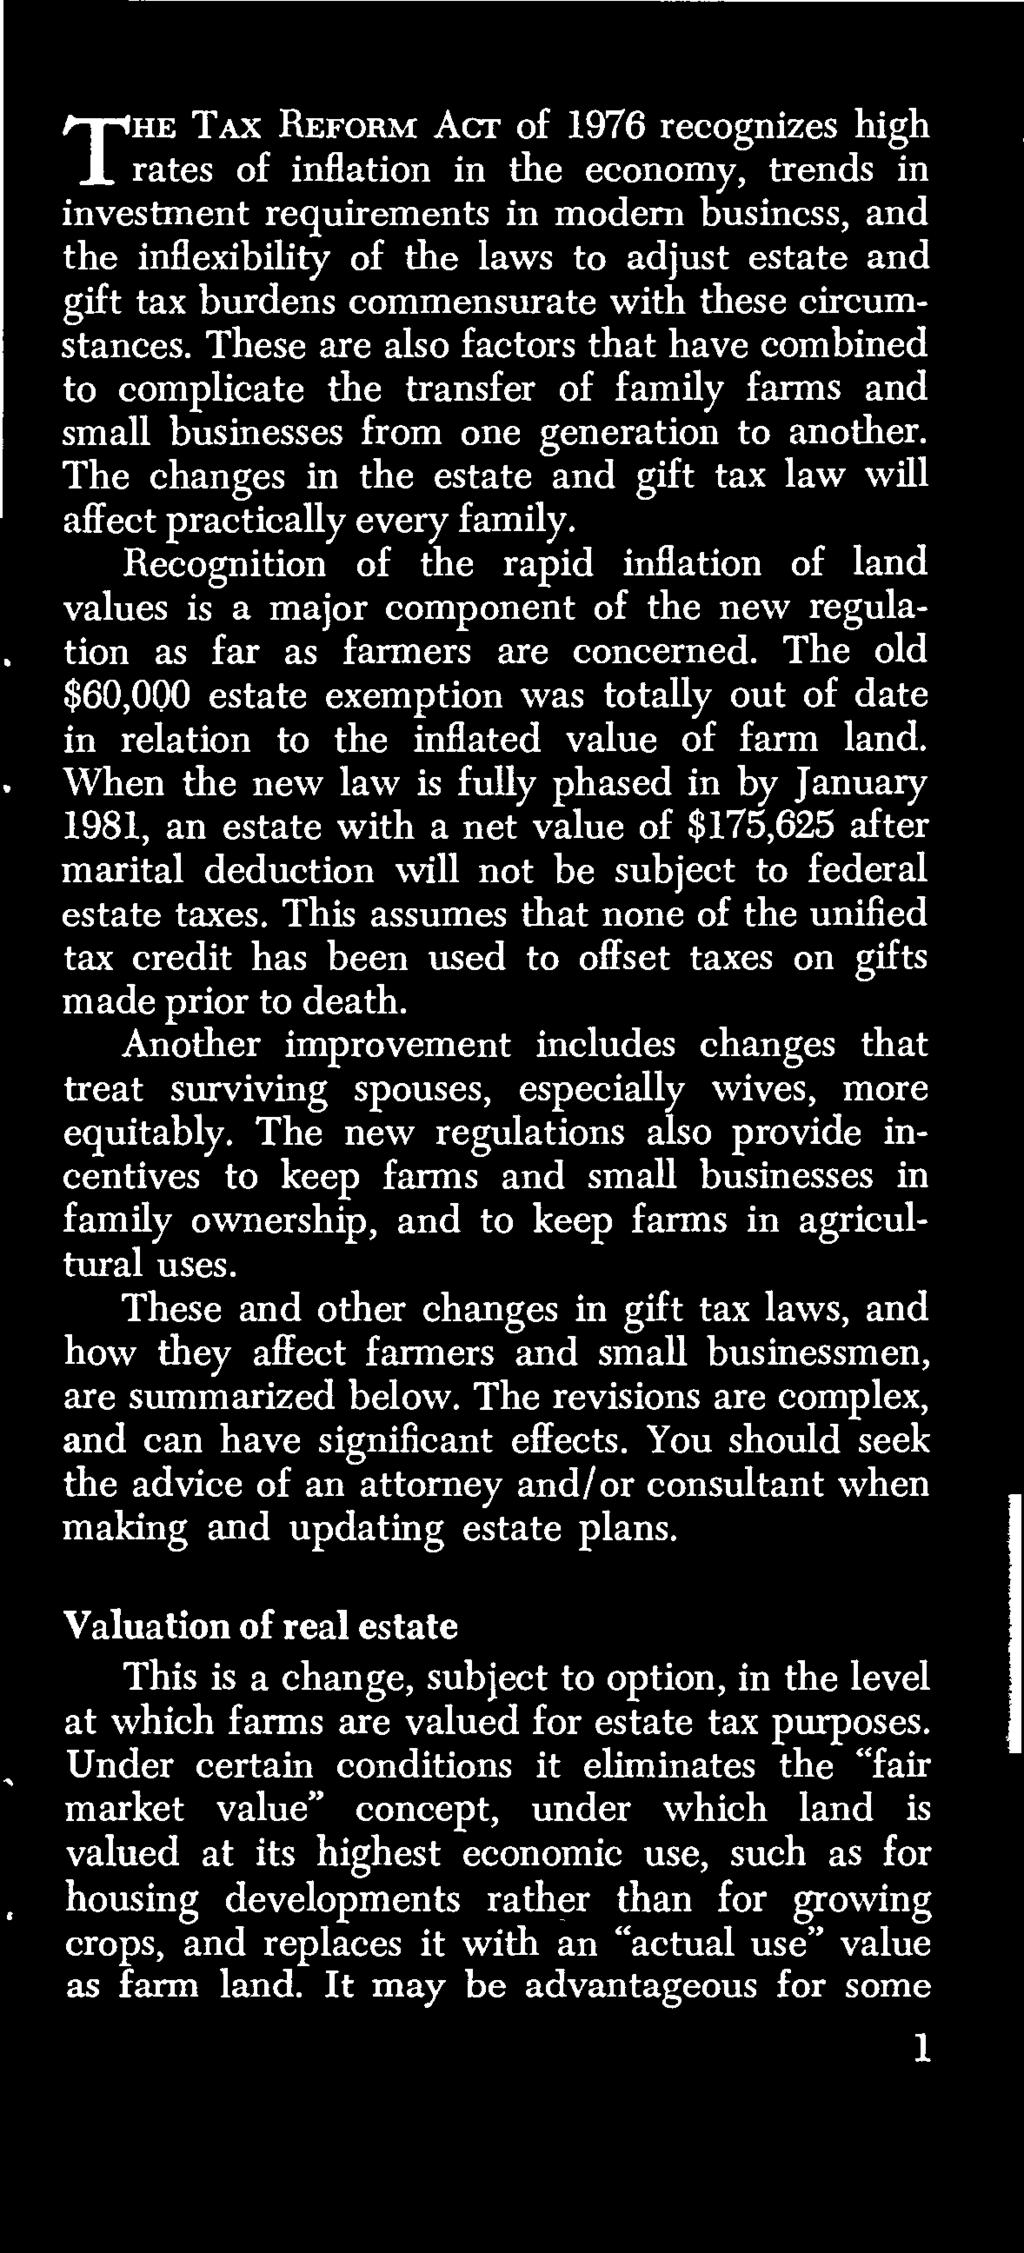 The old $60,000 estate exemption was totally out of date in relation to the inflated value of farm land.